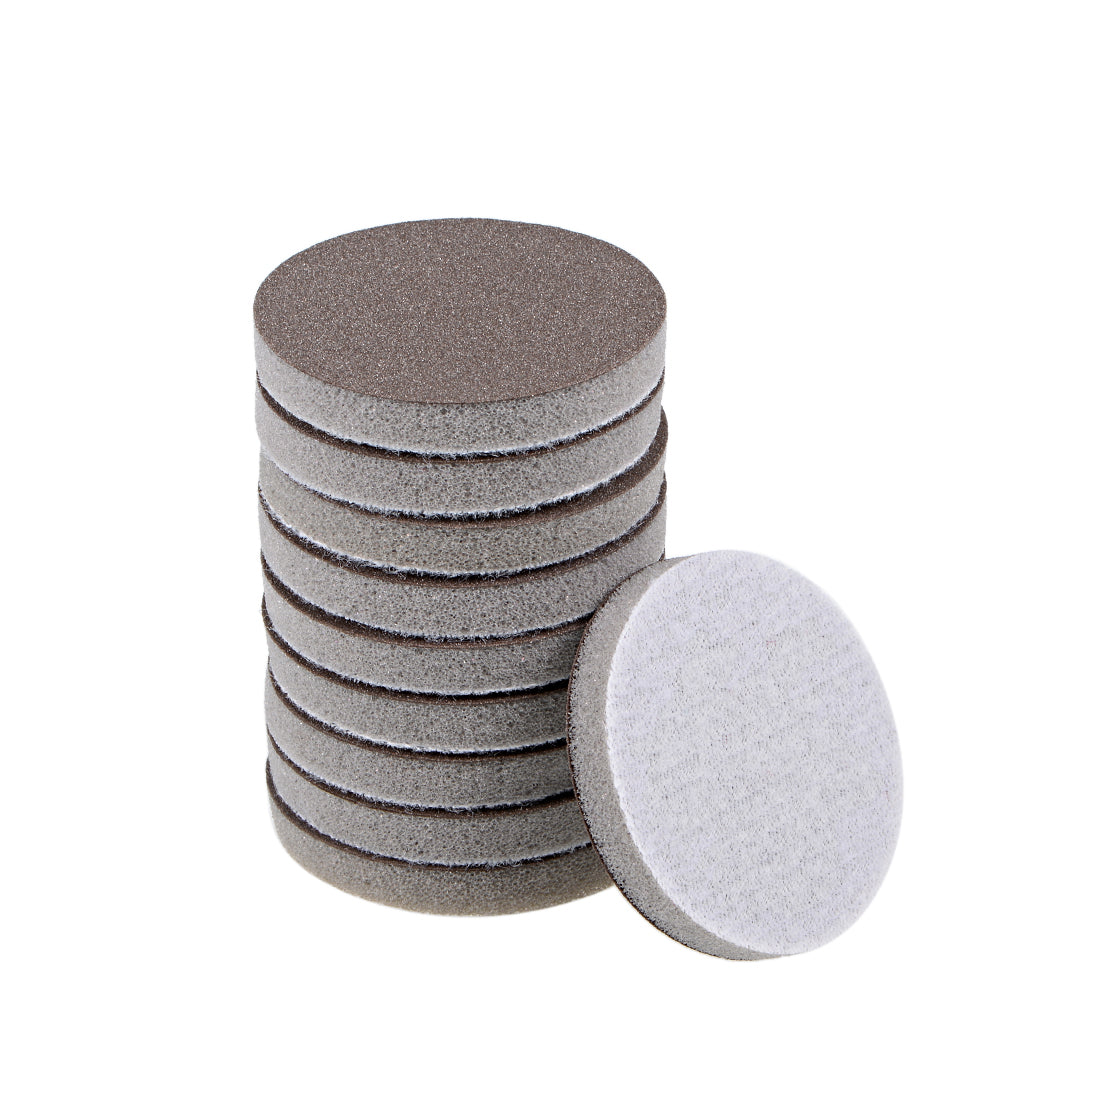 uxcell Uxcell 1.5-Inch 600-Grits Hook and Loop Sanding Disc, Sponge Sanding Pad Wet Dry Aluminum Oxide Sandpaper for Polishing & Grinding 10pcs